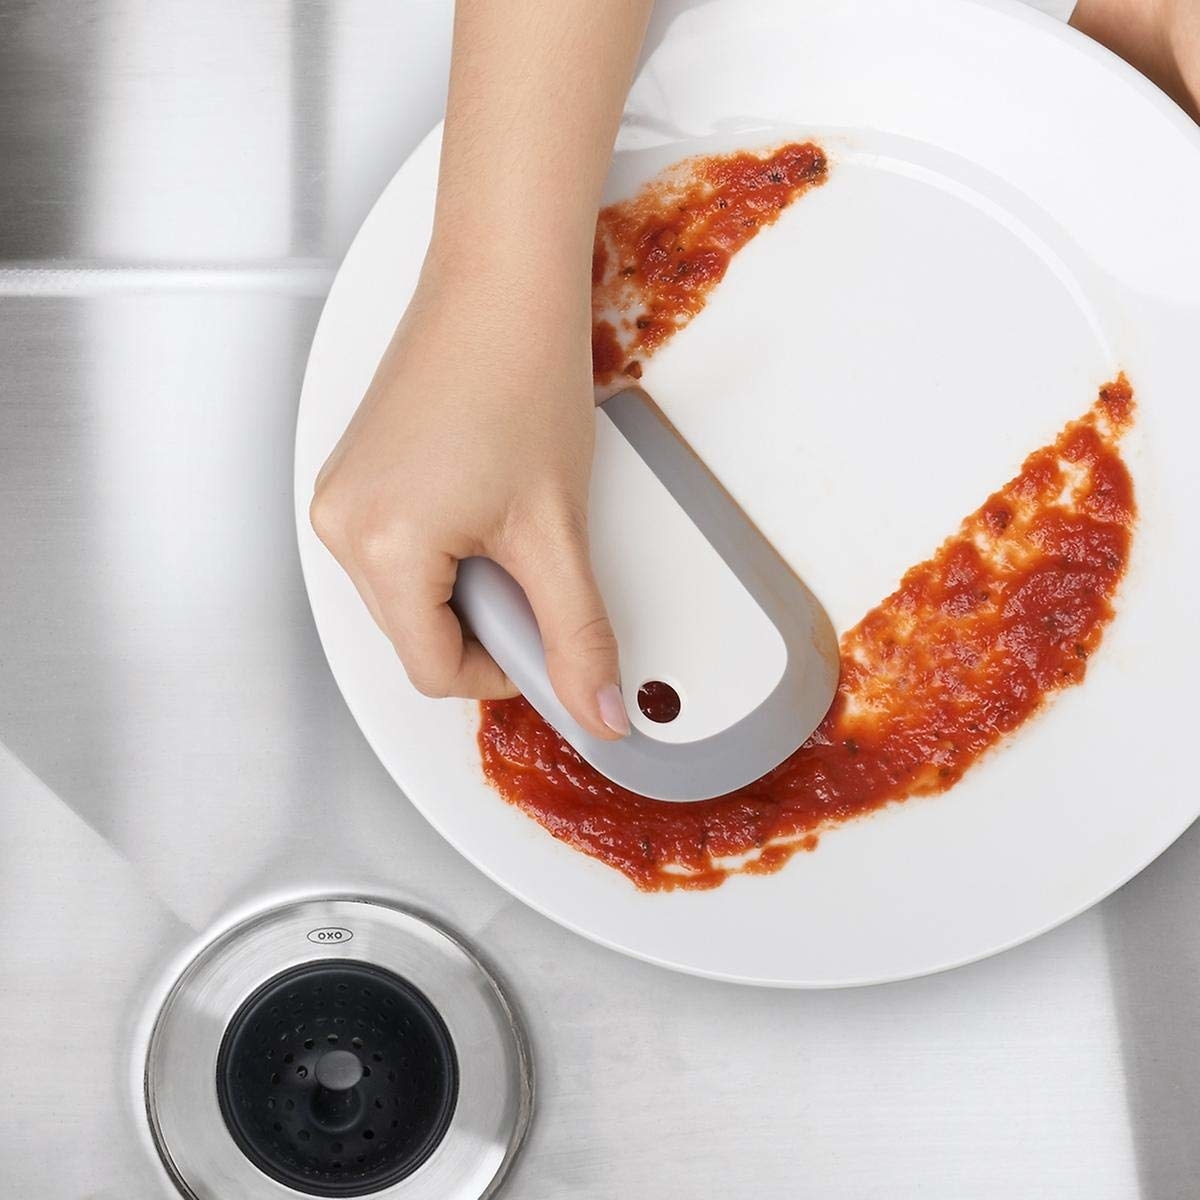 The squeegee and scraper pictured scraping off tomato sauce from a plate.